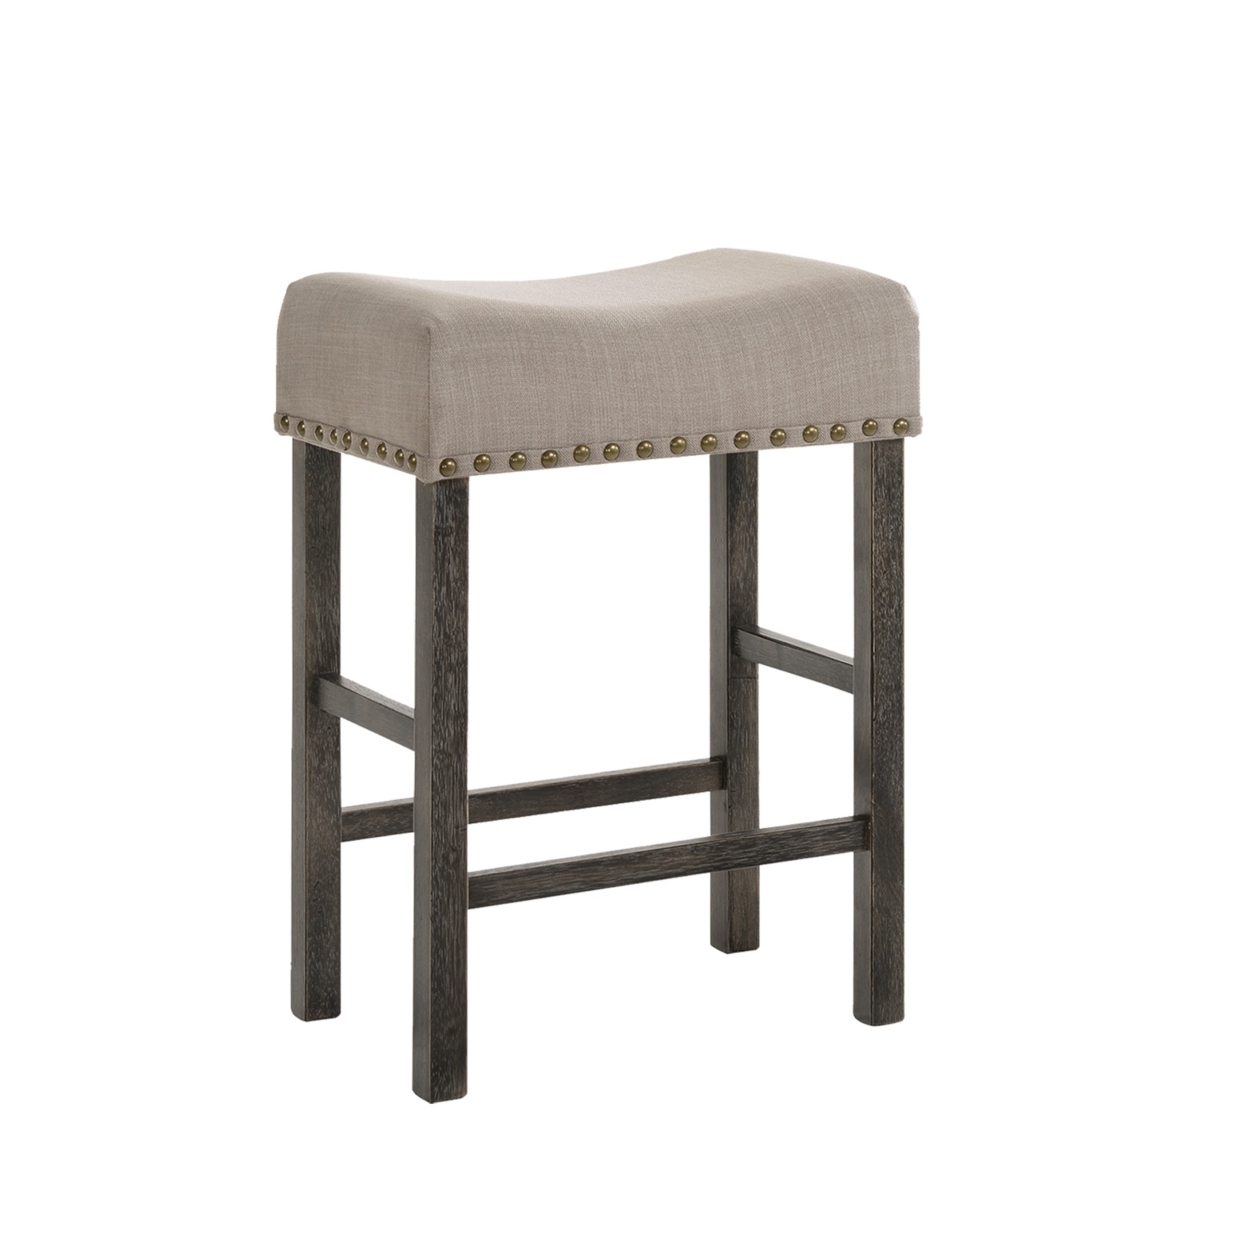 Wooden Counter Height Stool With Linen Upholstered Saddle Seat, Set Of 2, Beige And Gray- Saltoro Sherpi